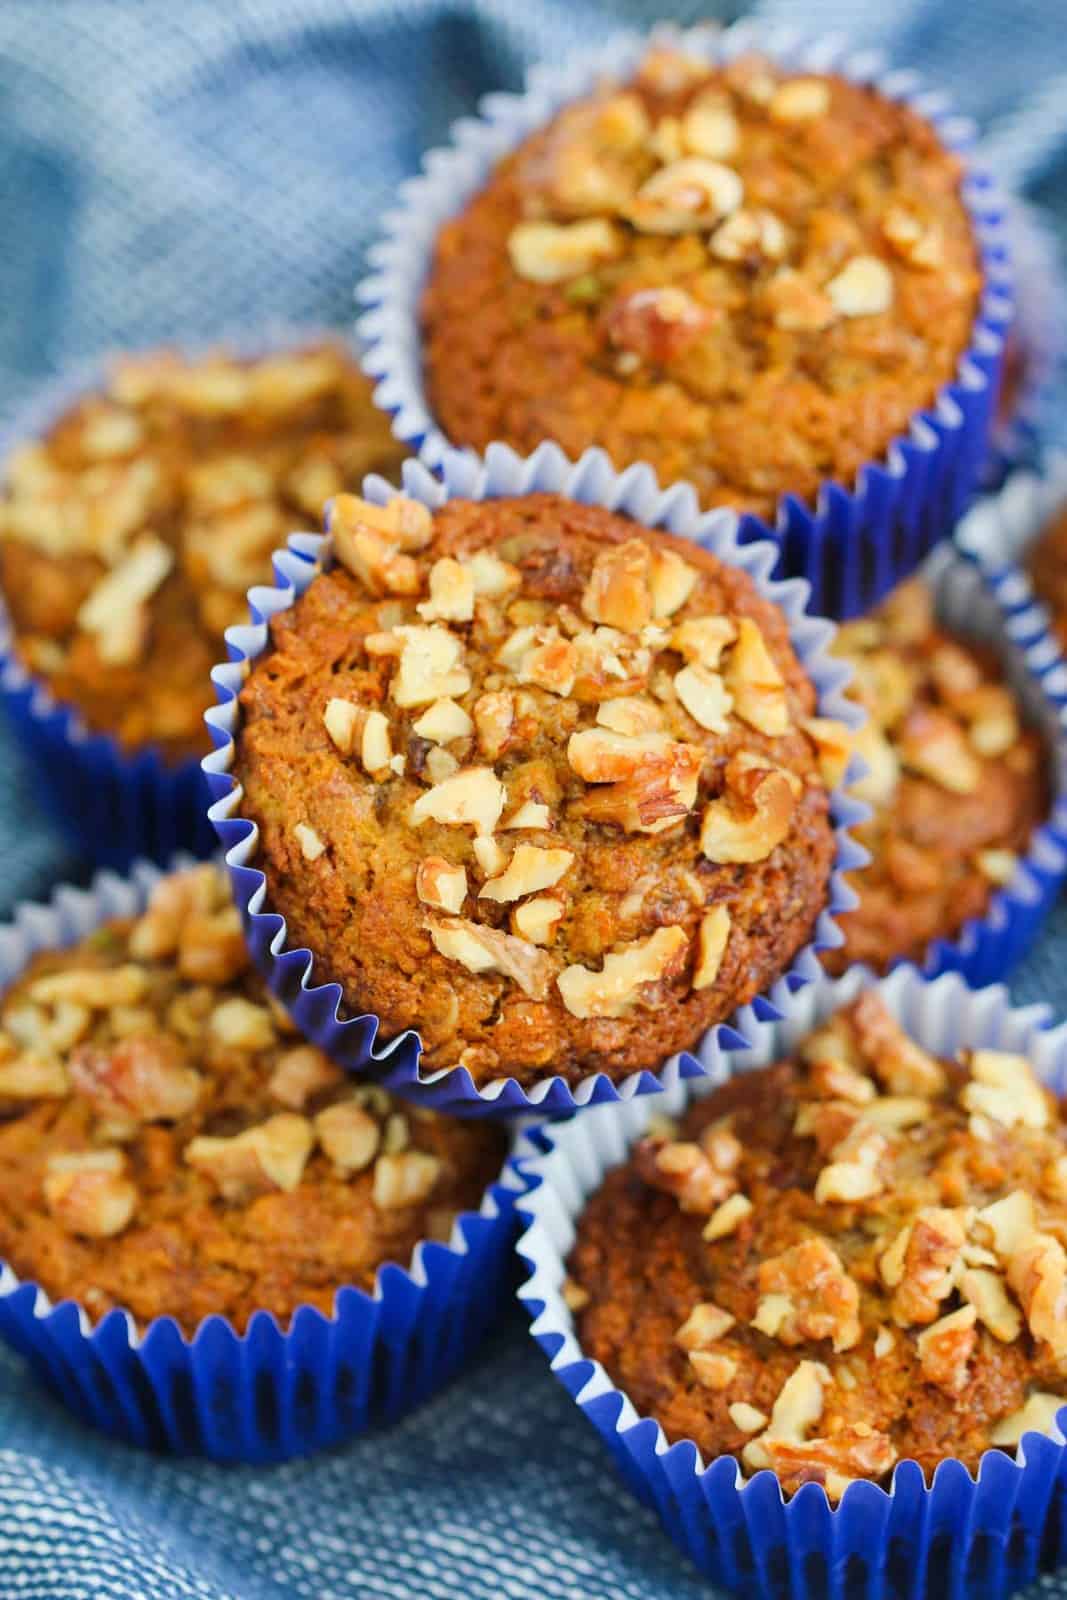 A pile of healthy muffins sprinkled with chopped walnuts on top.